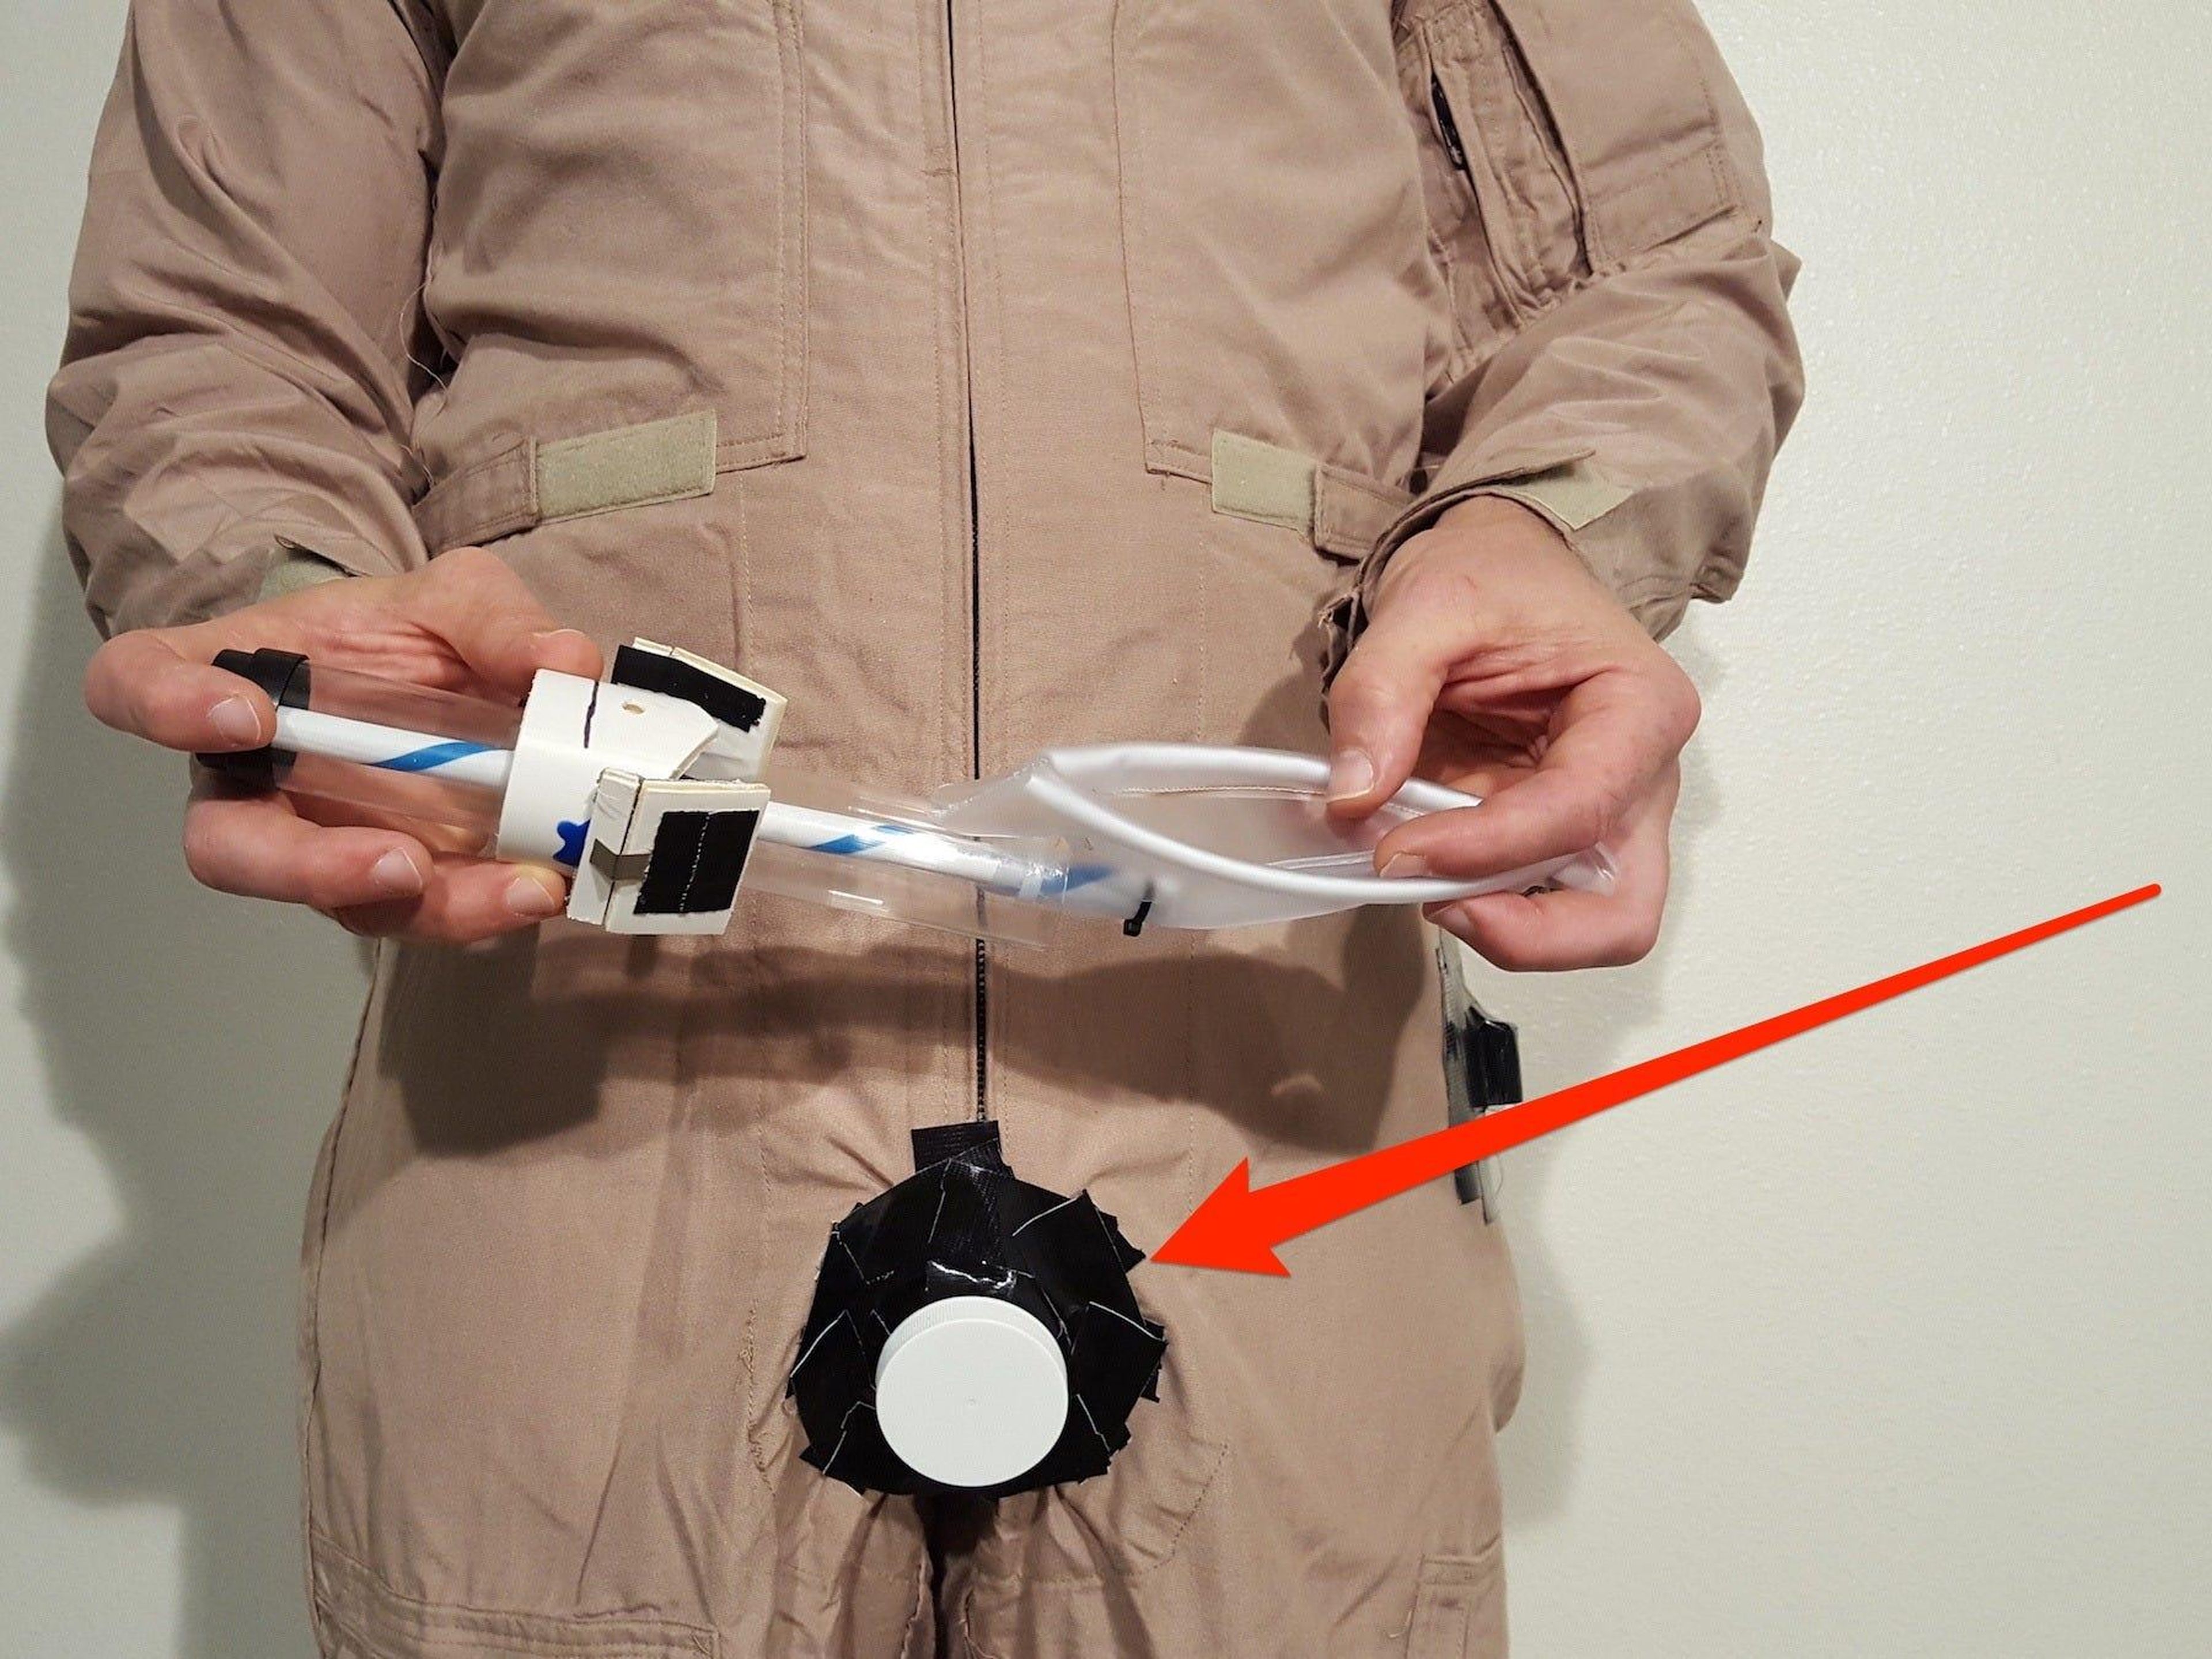 Dr. Thatcher Cardon's system hinges on an air-lock port that astronauts could use to slip items like inflatable bedpans and space underwear in and out of their suits without depressurizing them. Courtesy Dr. Thatcher Cardon; Business Insider